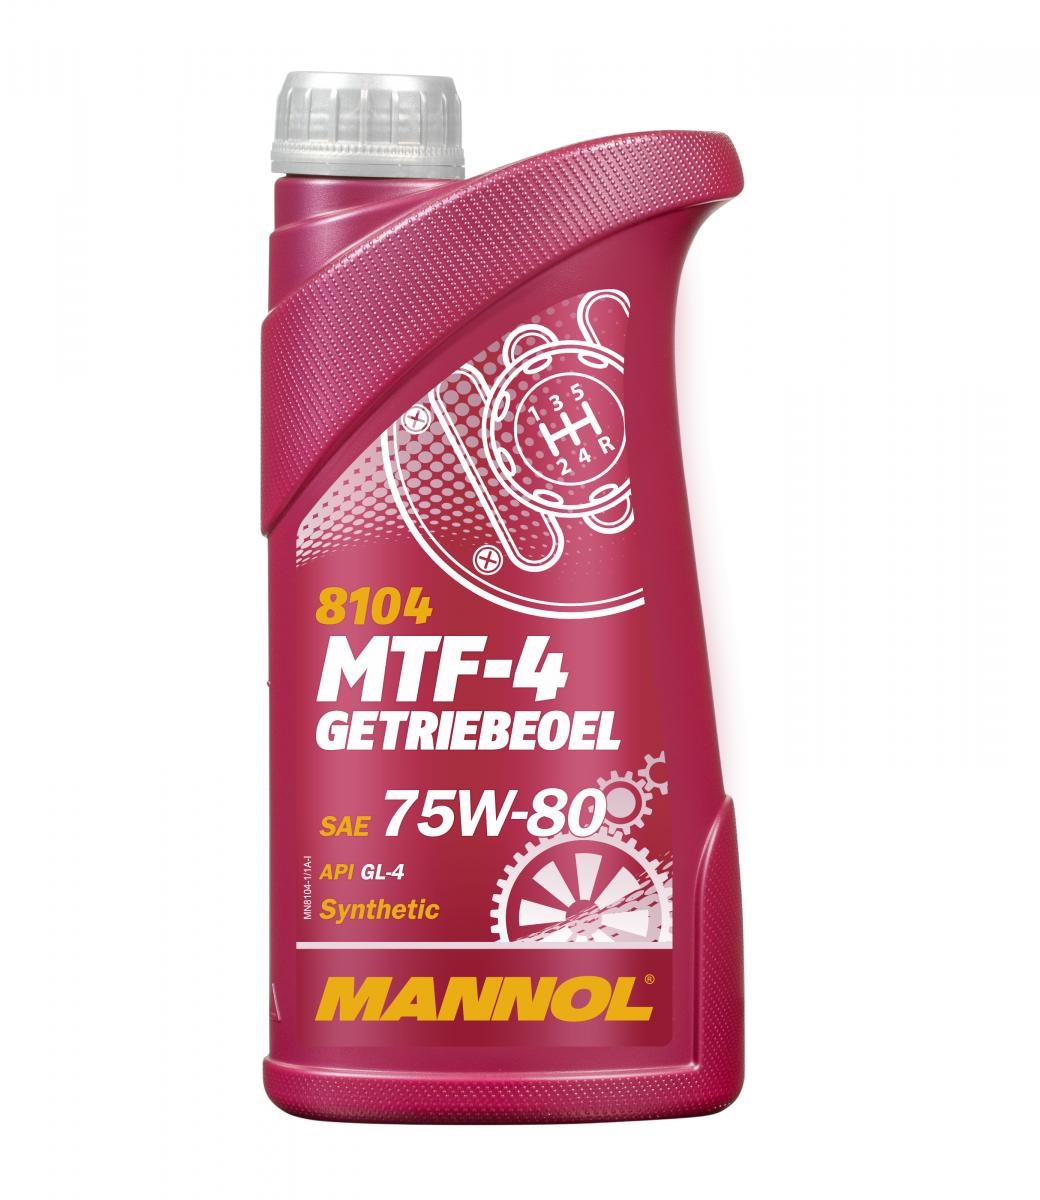 MANNOL MTF-4 GL-4 MN81041 Gearbox oil and transmission oil Honda Accord 7 Tourer 2.4 190 hp Petrol 2008 price